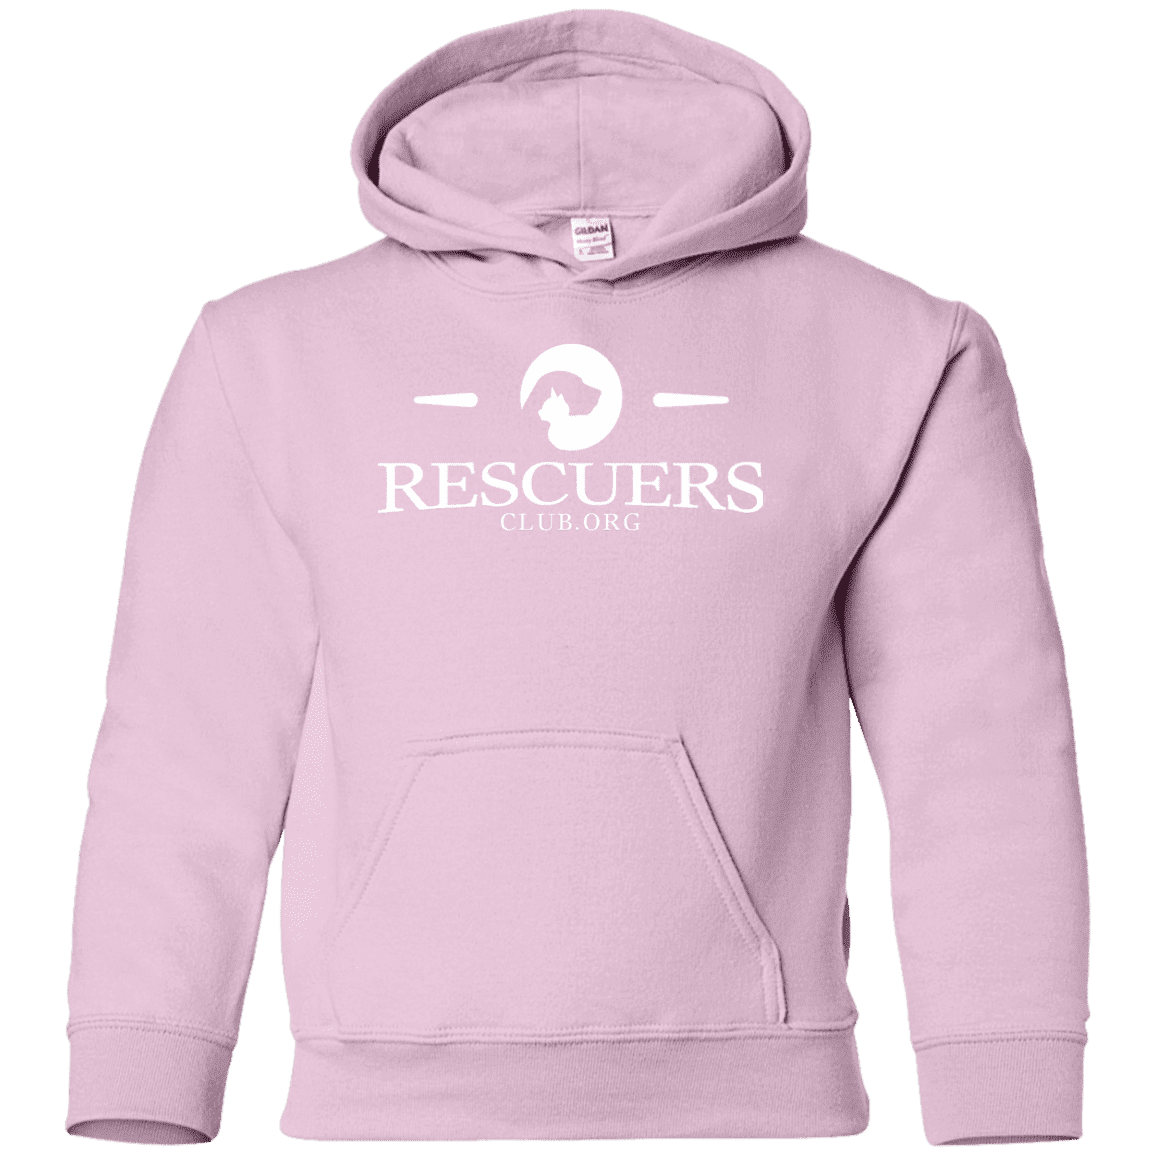 Rescuers Club Official Logo - Youth Hoodie.